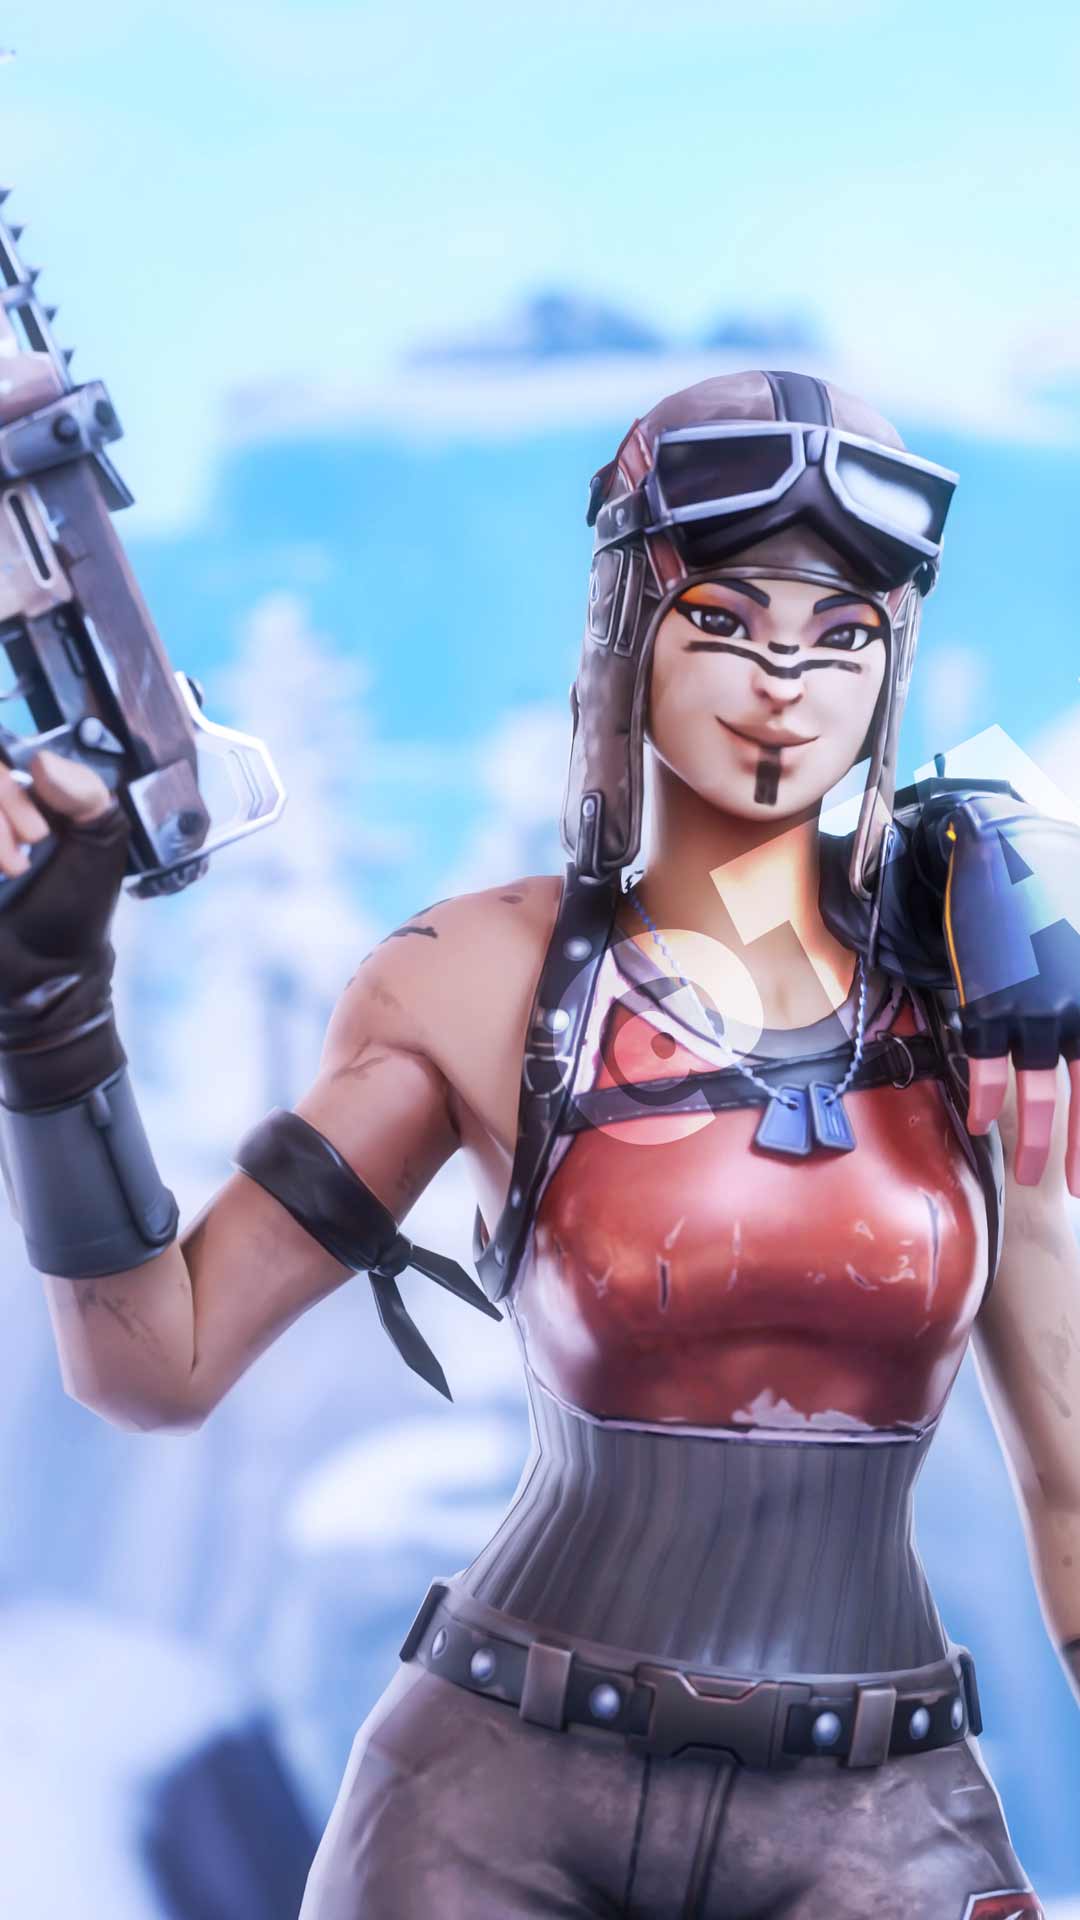 Download wallpapers 4k Renegade Raider orange grunge background  Fortnite vortex Fortnite characters Renegade Raider Skin Fortnite  Battle Royale Renegade Raider Fortnite for desktop with resolution  3840x2400 High Quality HD pictures wallpapers